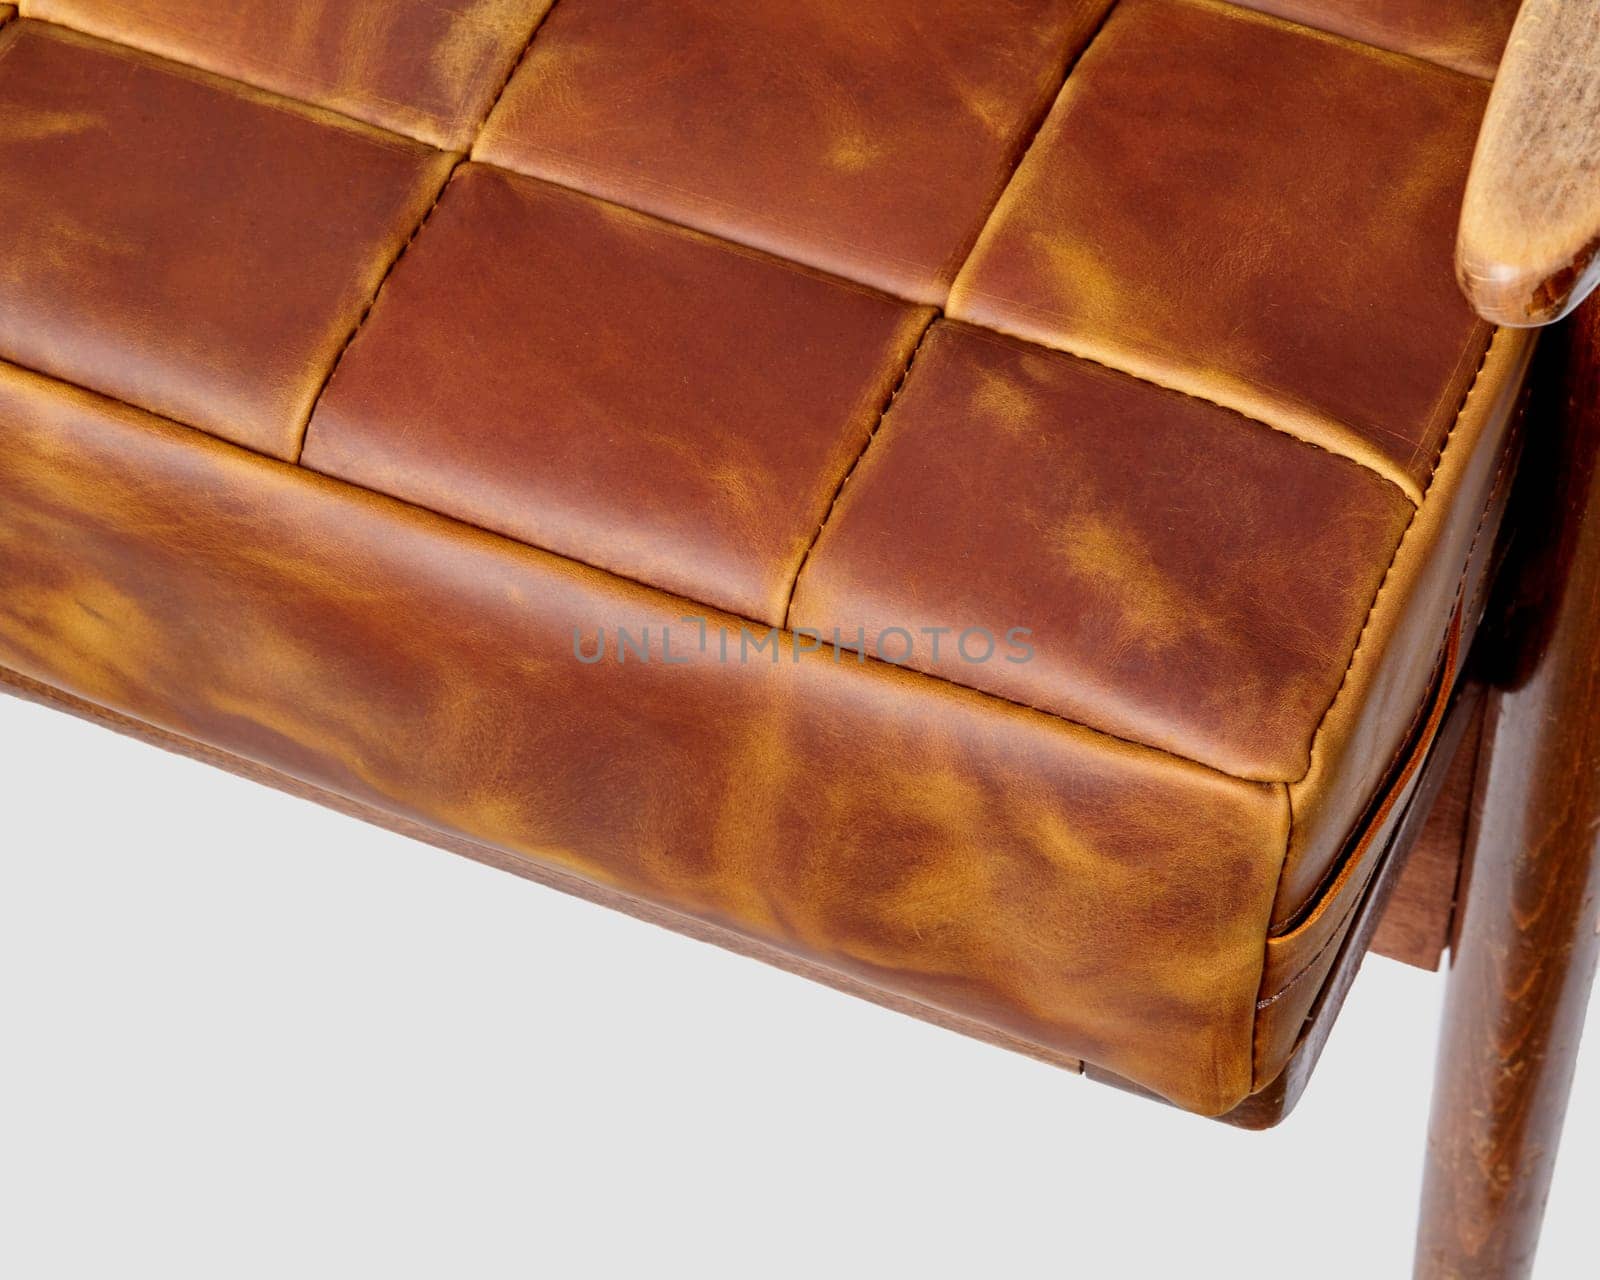 Detailed close-up of rich texture and varied tones of brown leather patchwork seat cushion on vintage style chair with wooden armrest, reflecting skilled craftsmanship